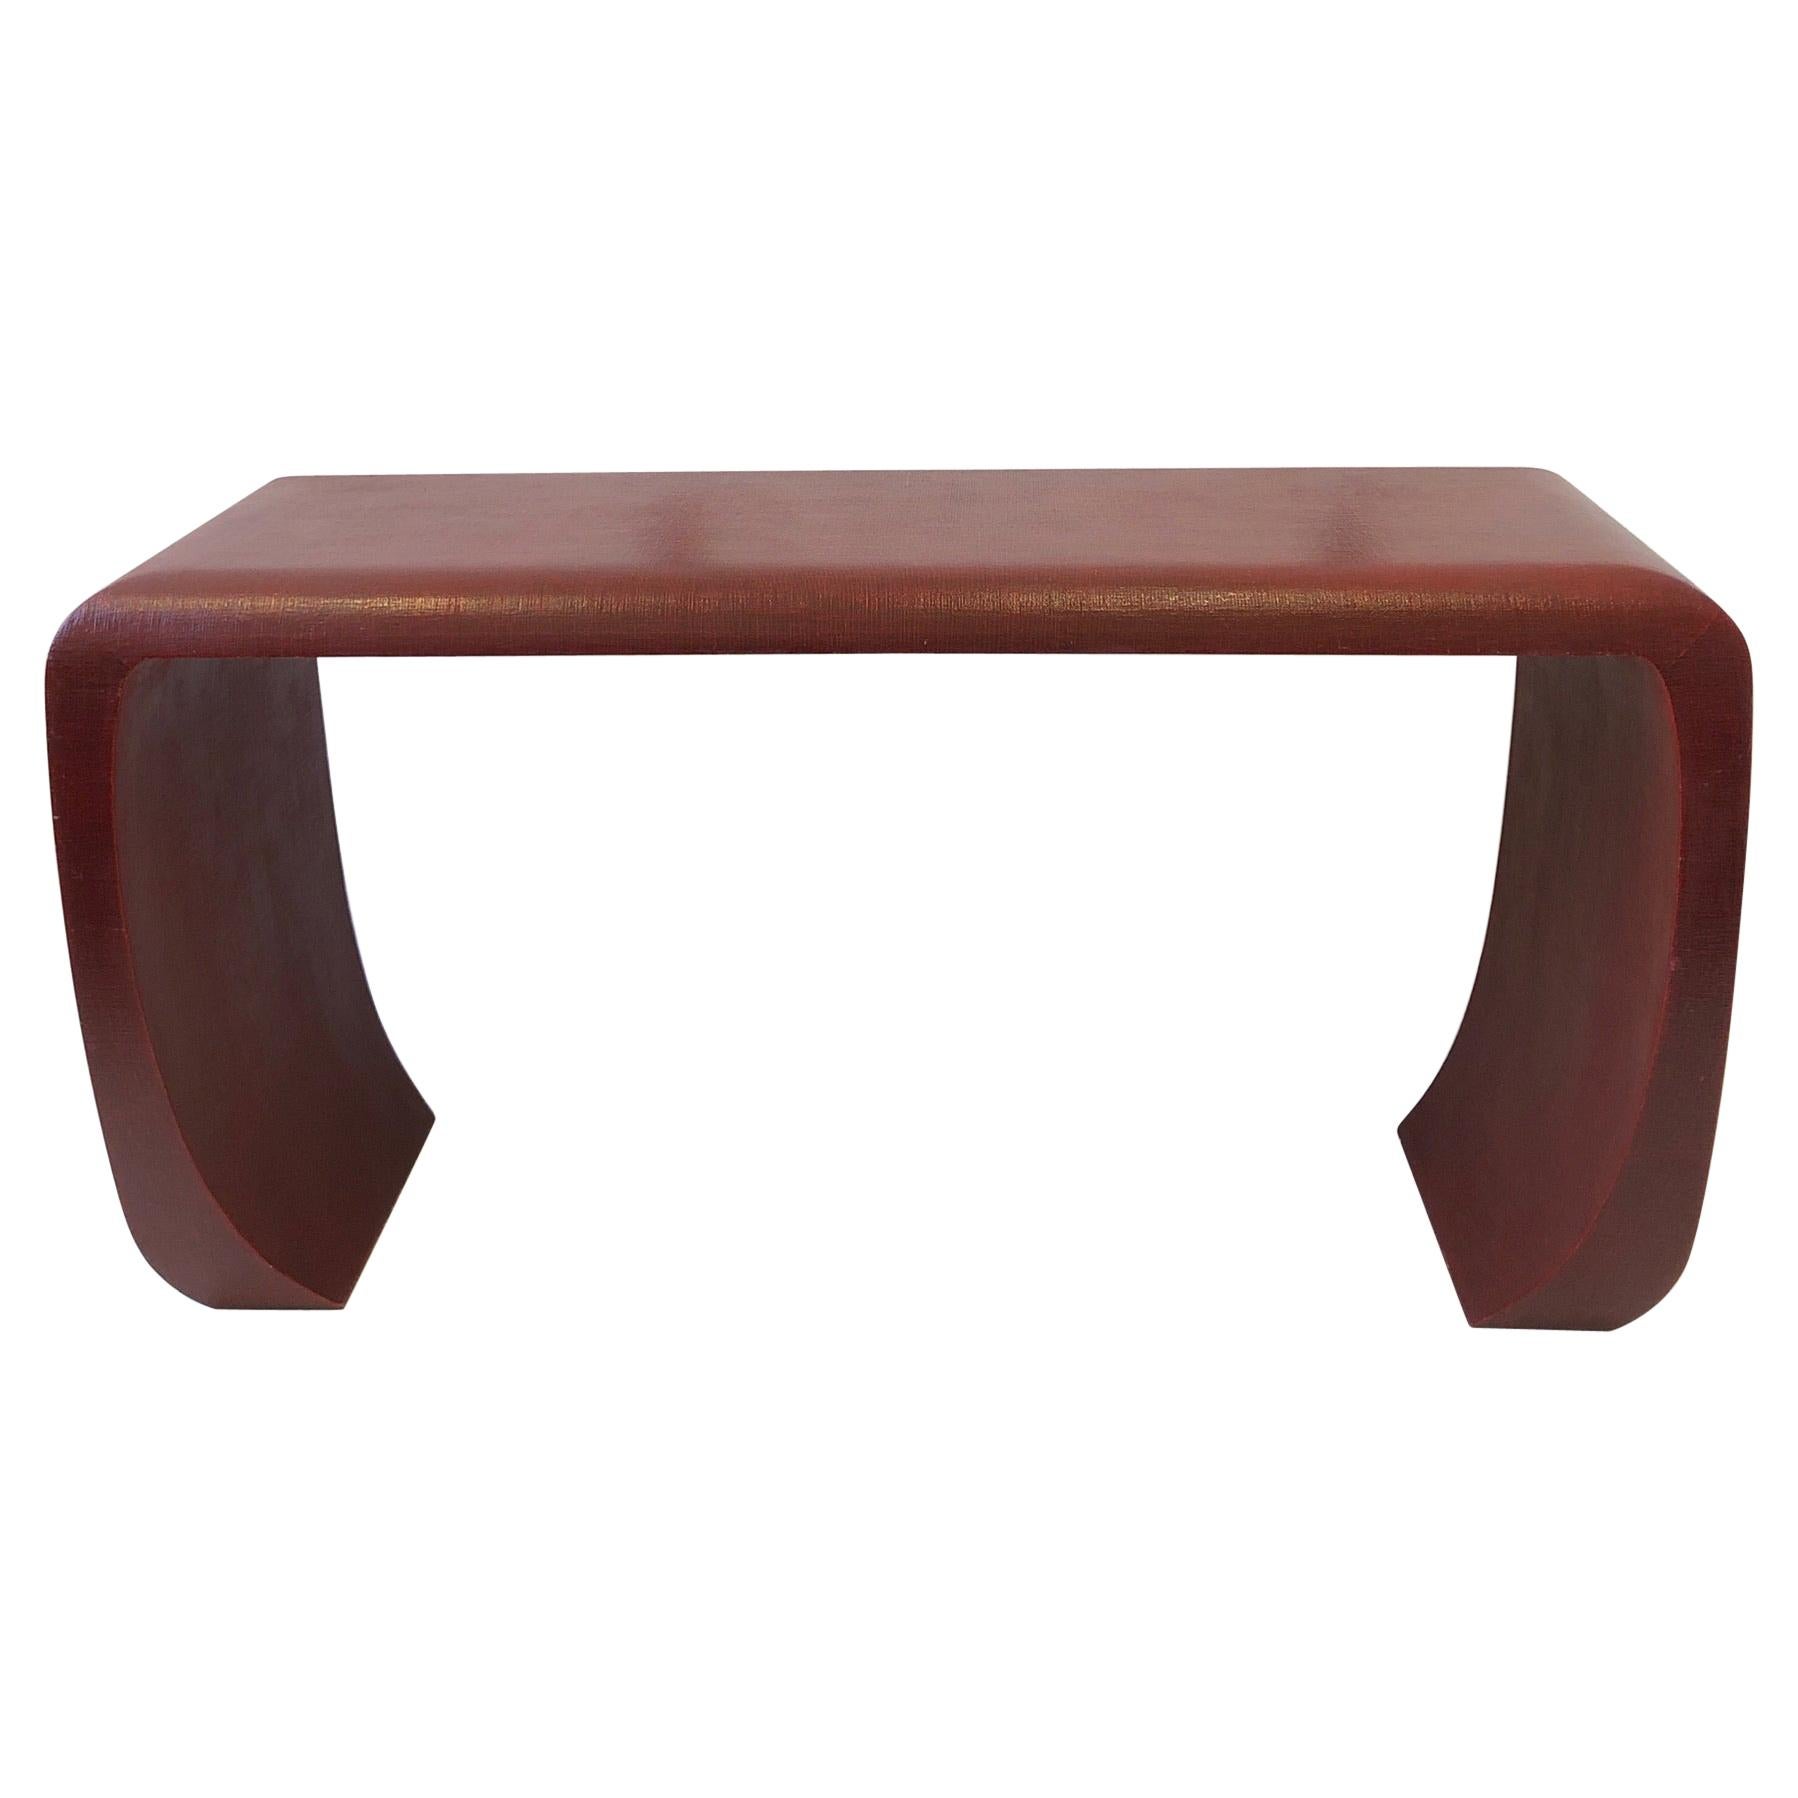 Linen Red Lacquered Sculpted Console Table